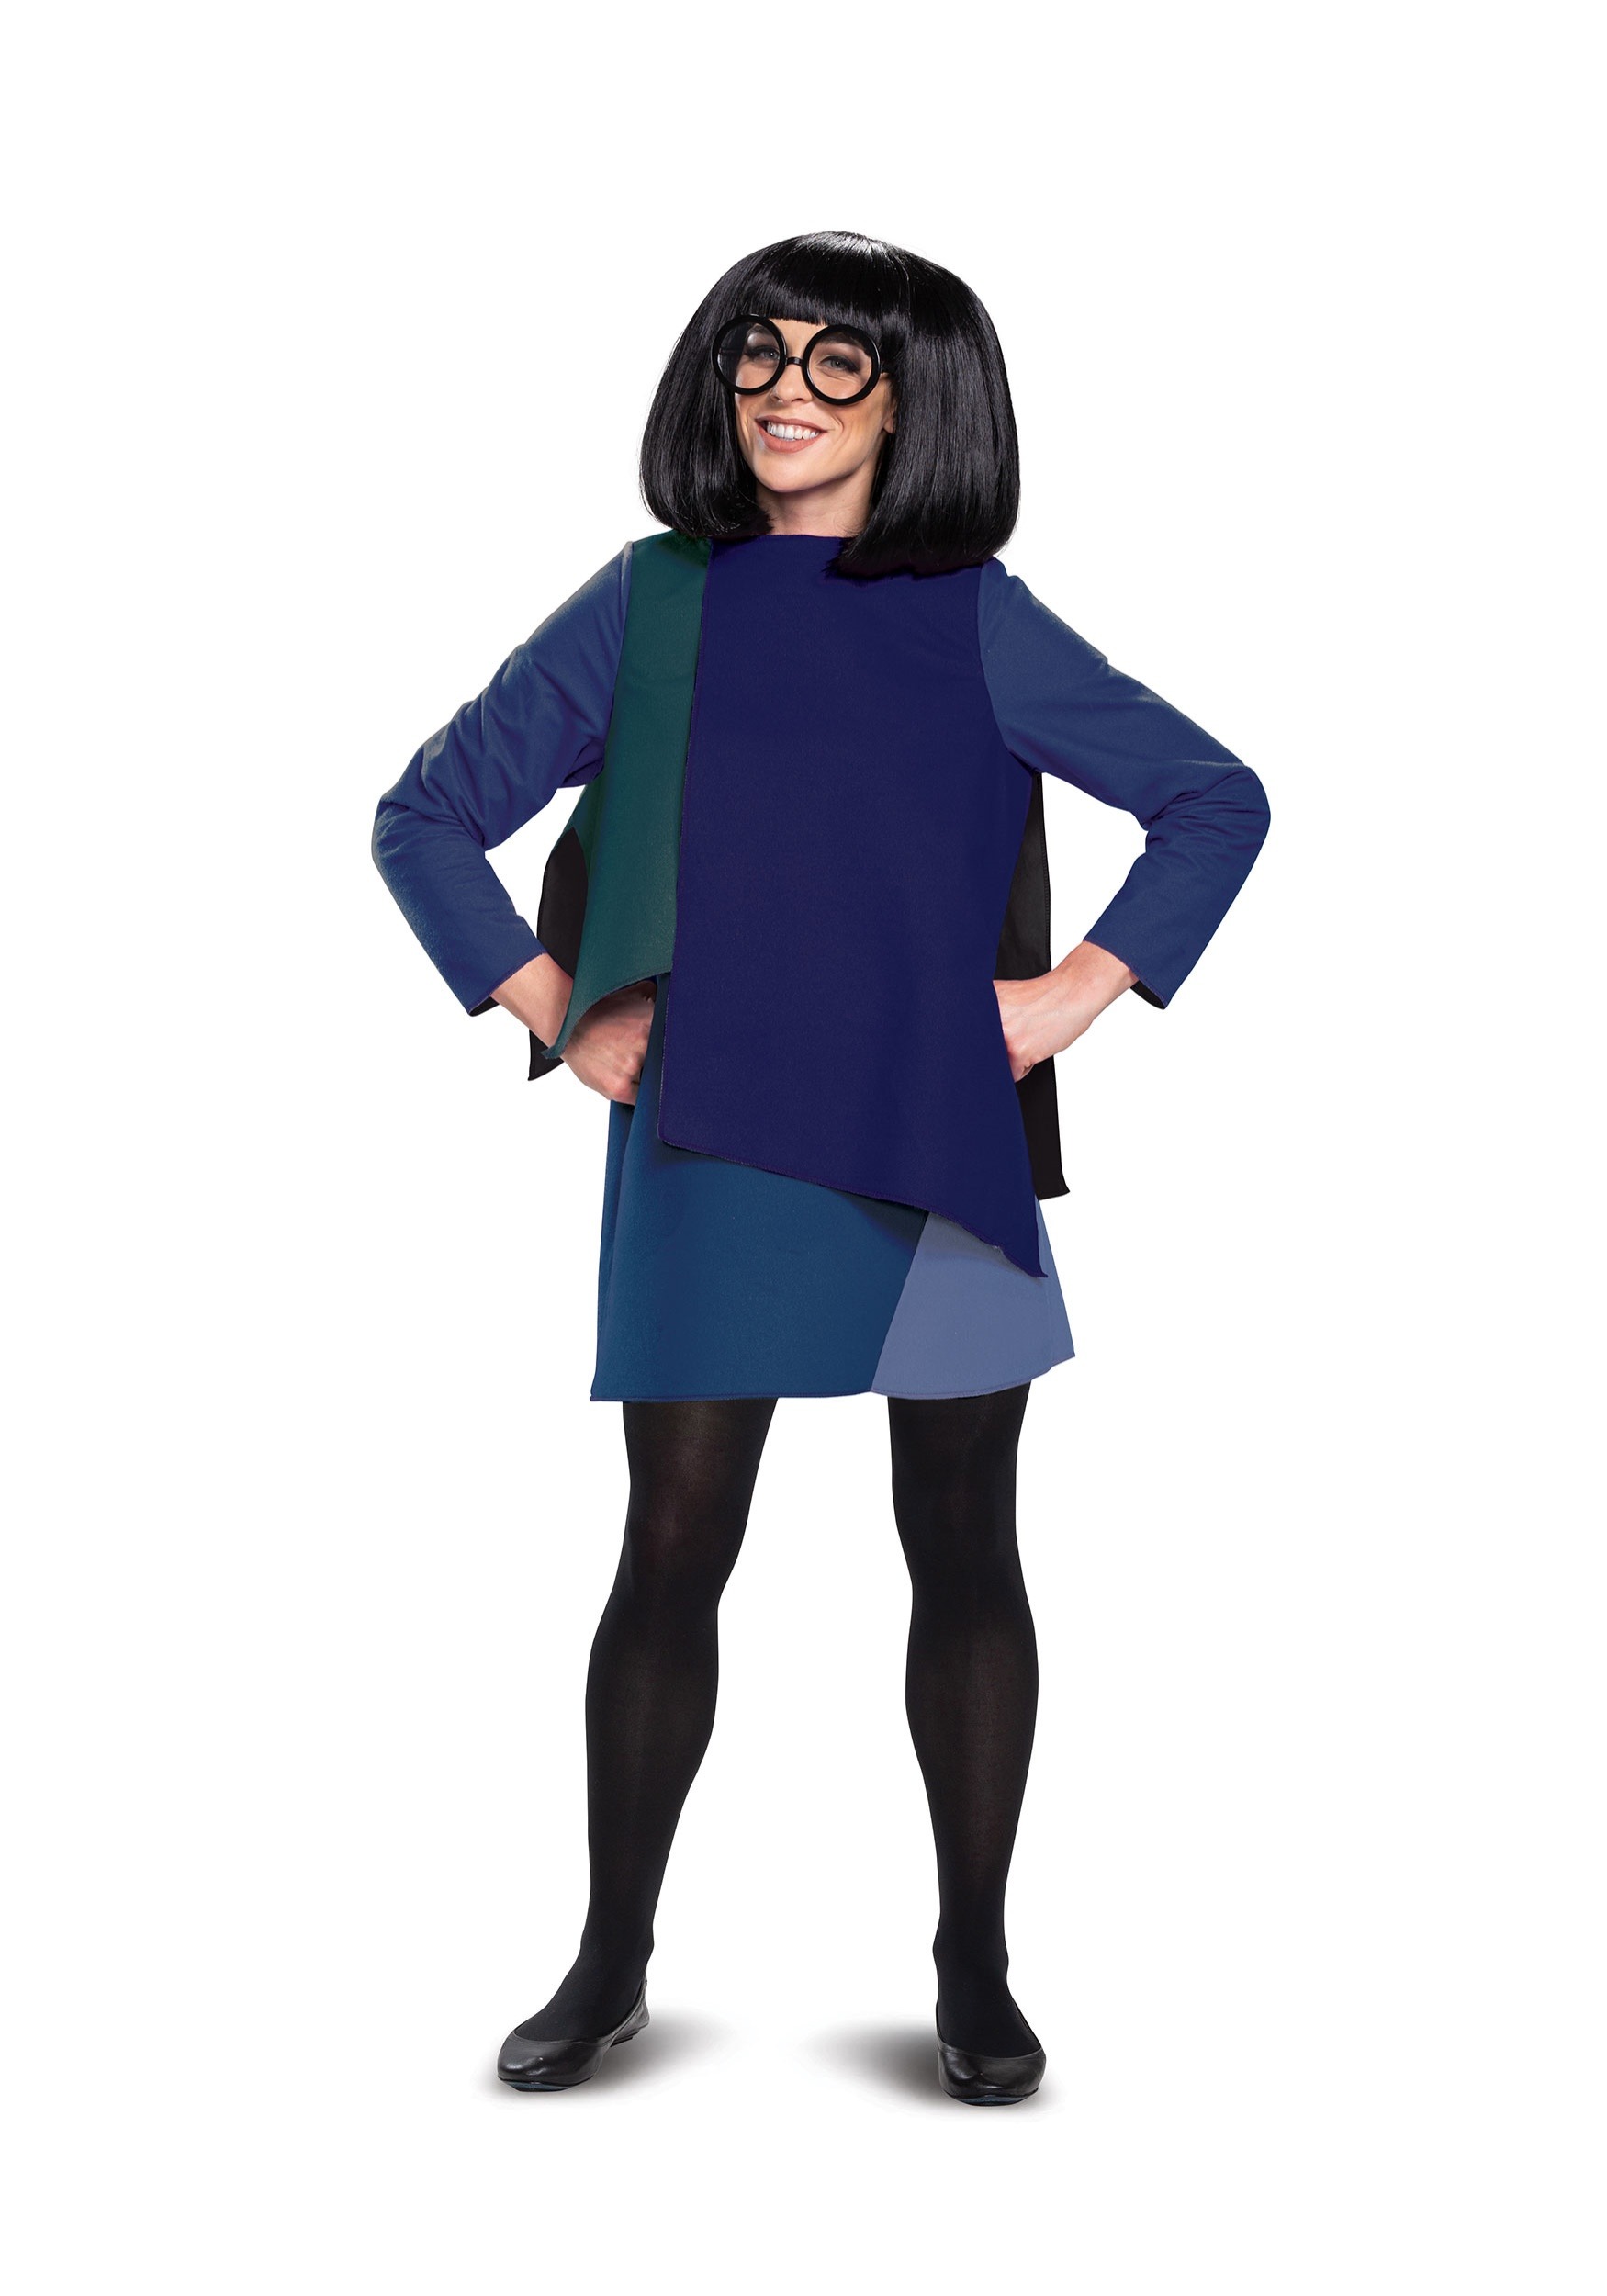 Photos - Fancy Dress Deluxe Disguise Incredibles 2  Adult Edna Costume Black/Blue DI12542 